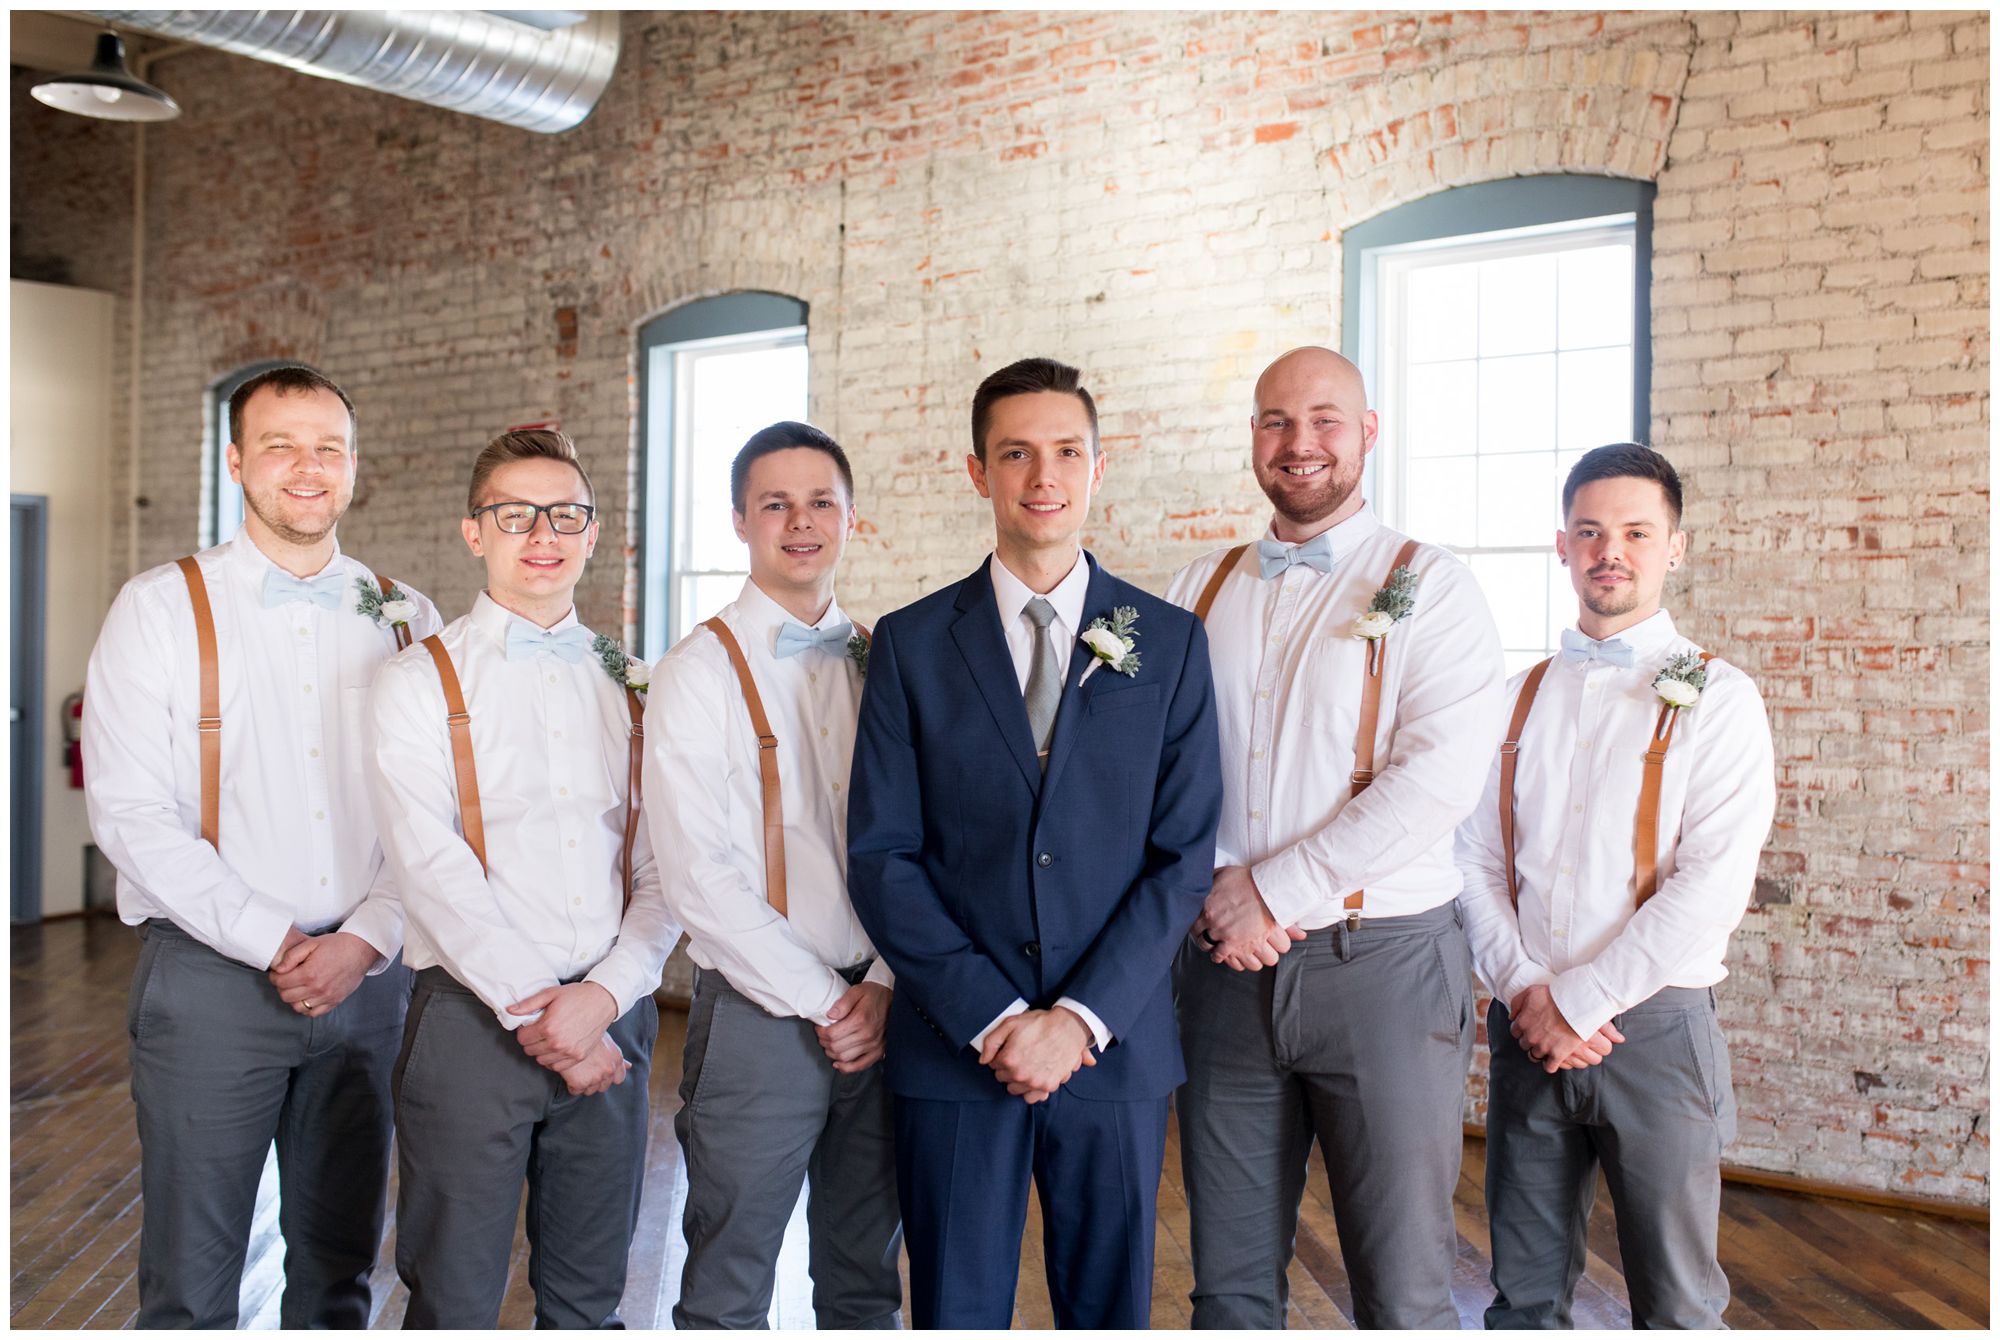 groom and groomsmen portraits before wedding ceremony at Bread & Chocolate